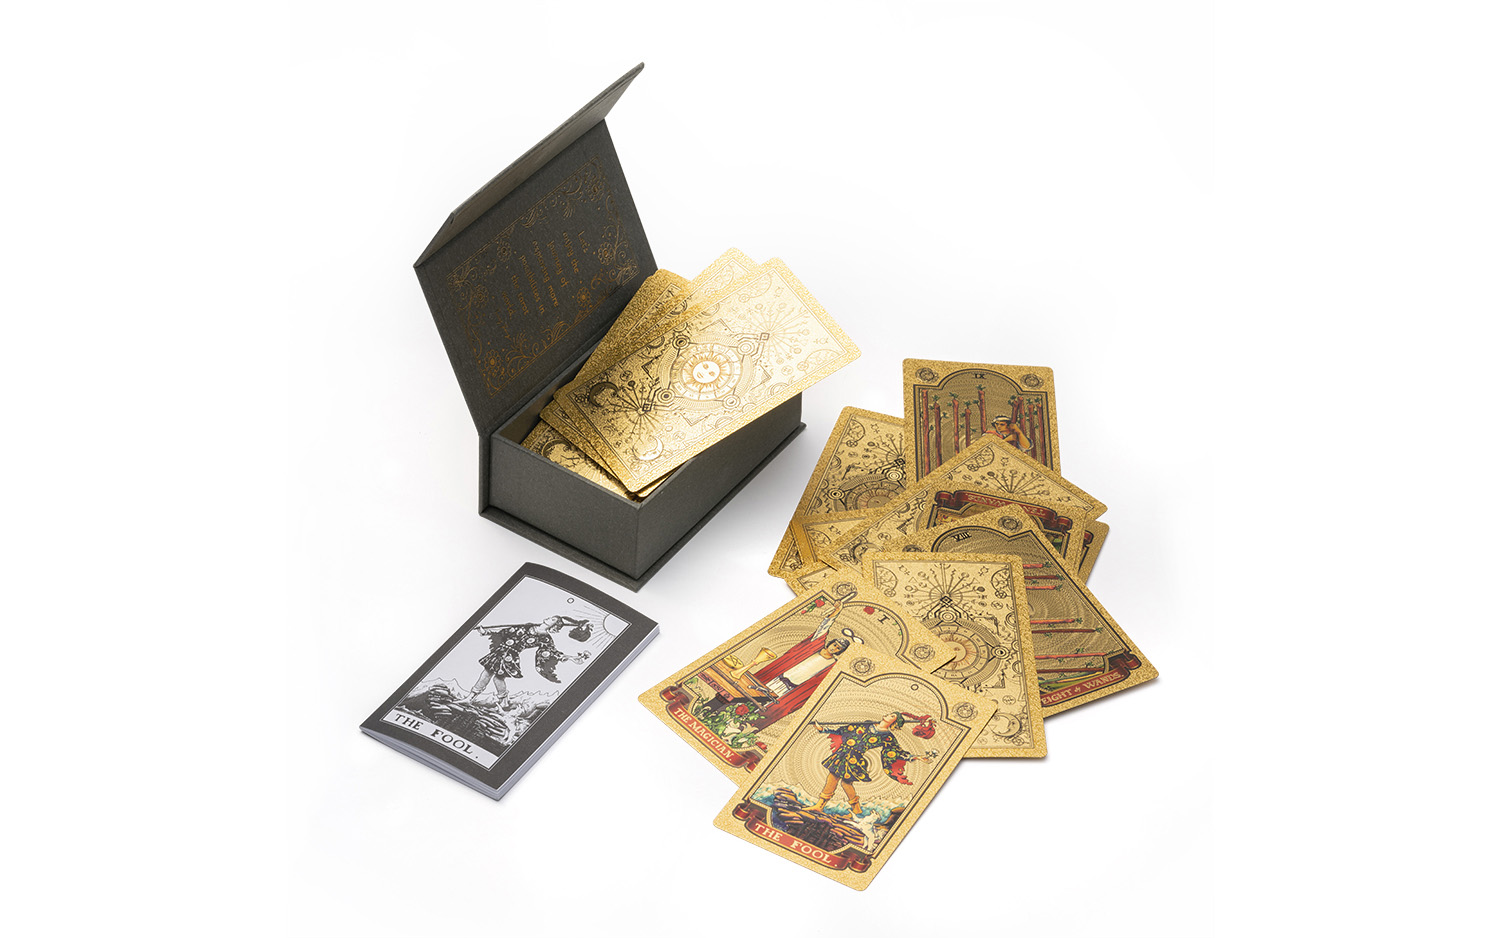 Golden Tarot Card for Beginners with Guidebook, Gold-Gilded 78 Original Tarot Cards Fortune Telling Cards Travel Set